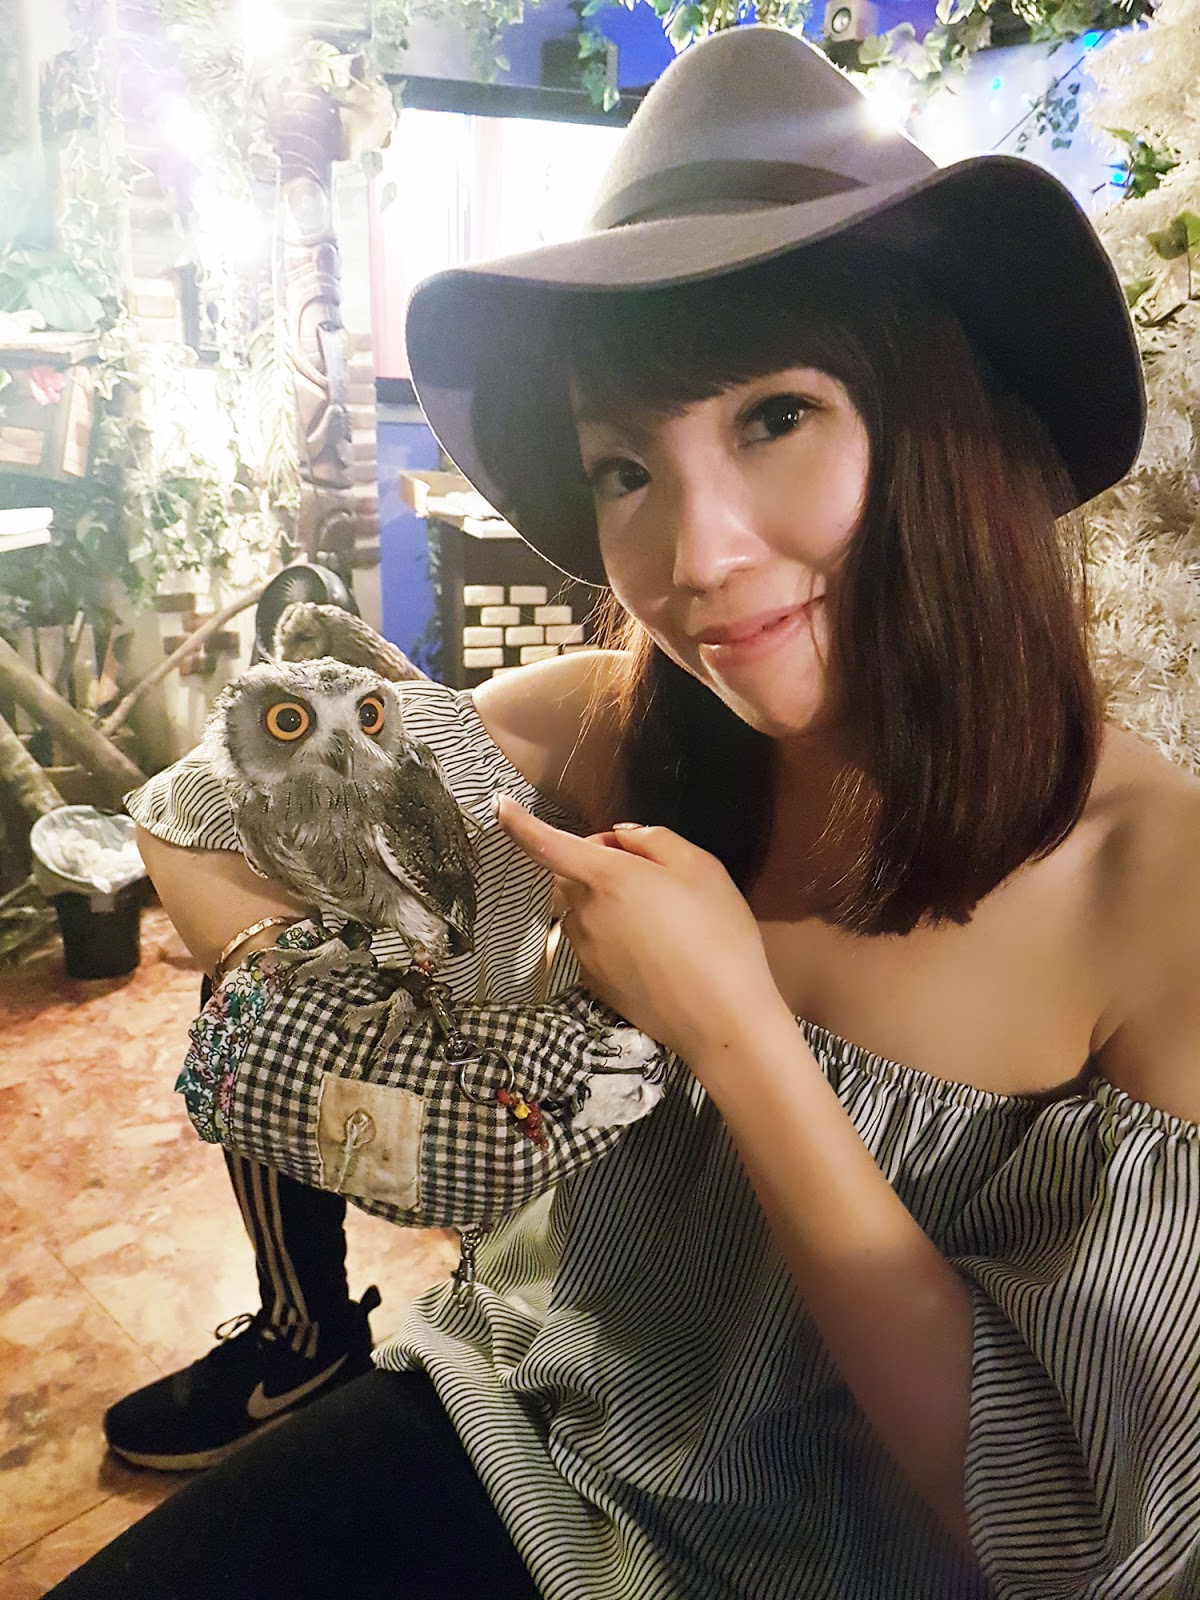 Forest of Owl - Owl cafe in Tokyo